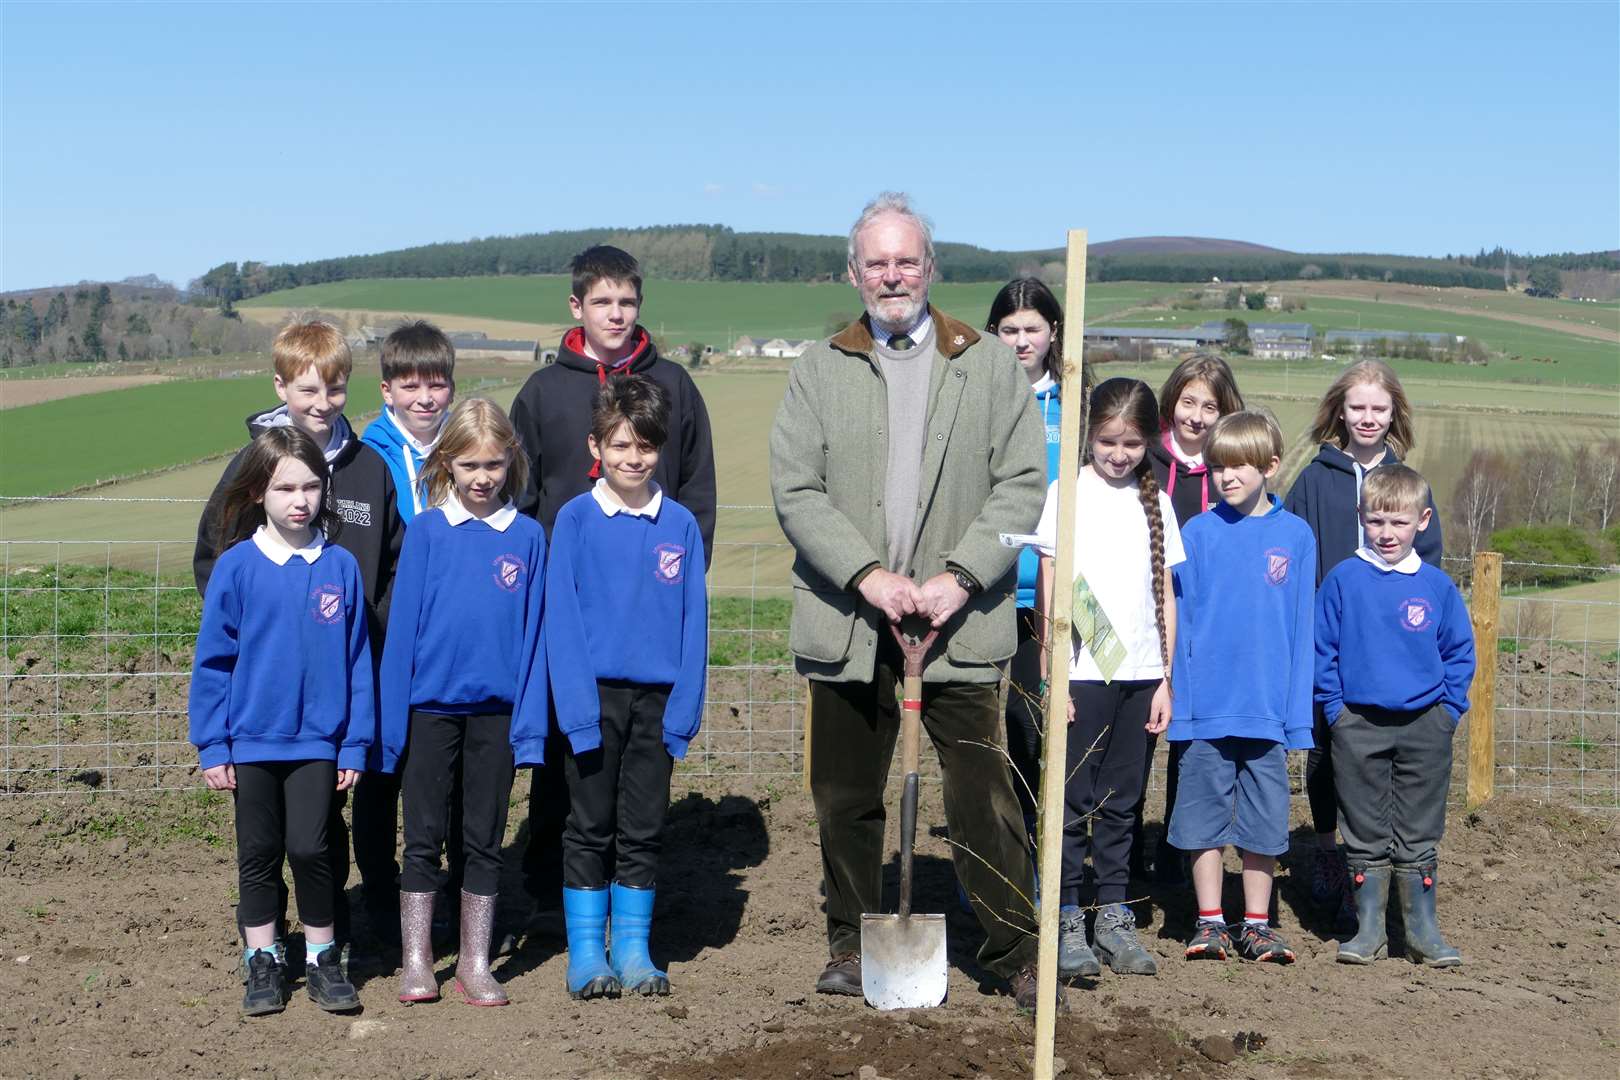 Pupils from Tarland and Logie Coldstone planted trees for the Queen's platinum jubilee.